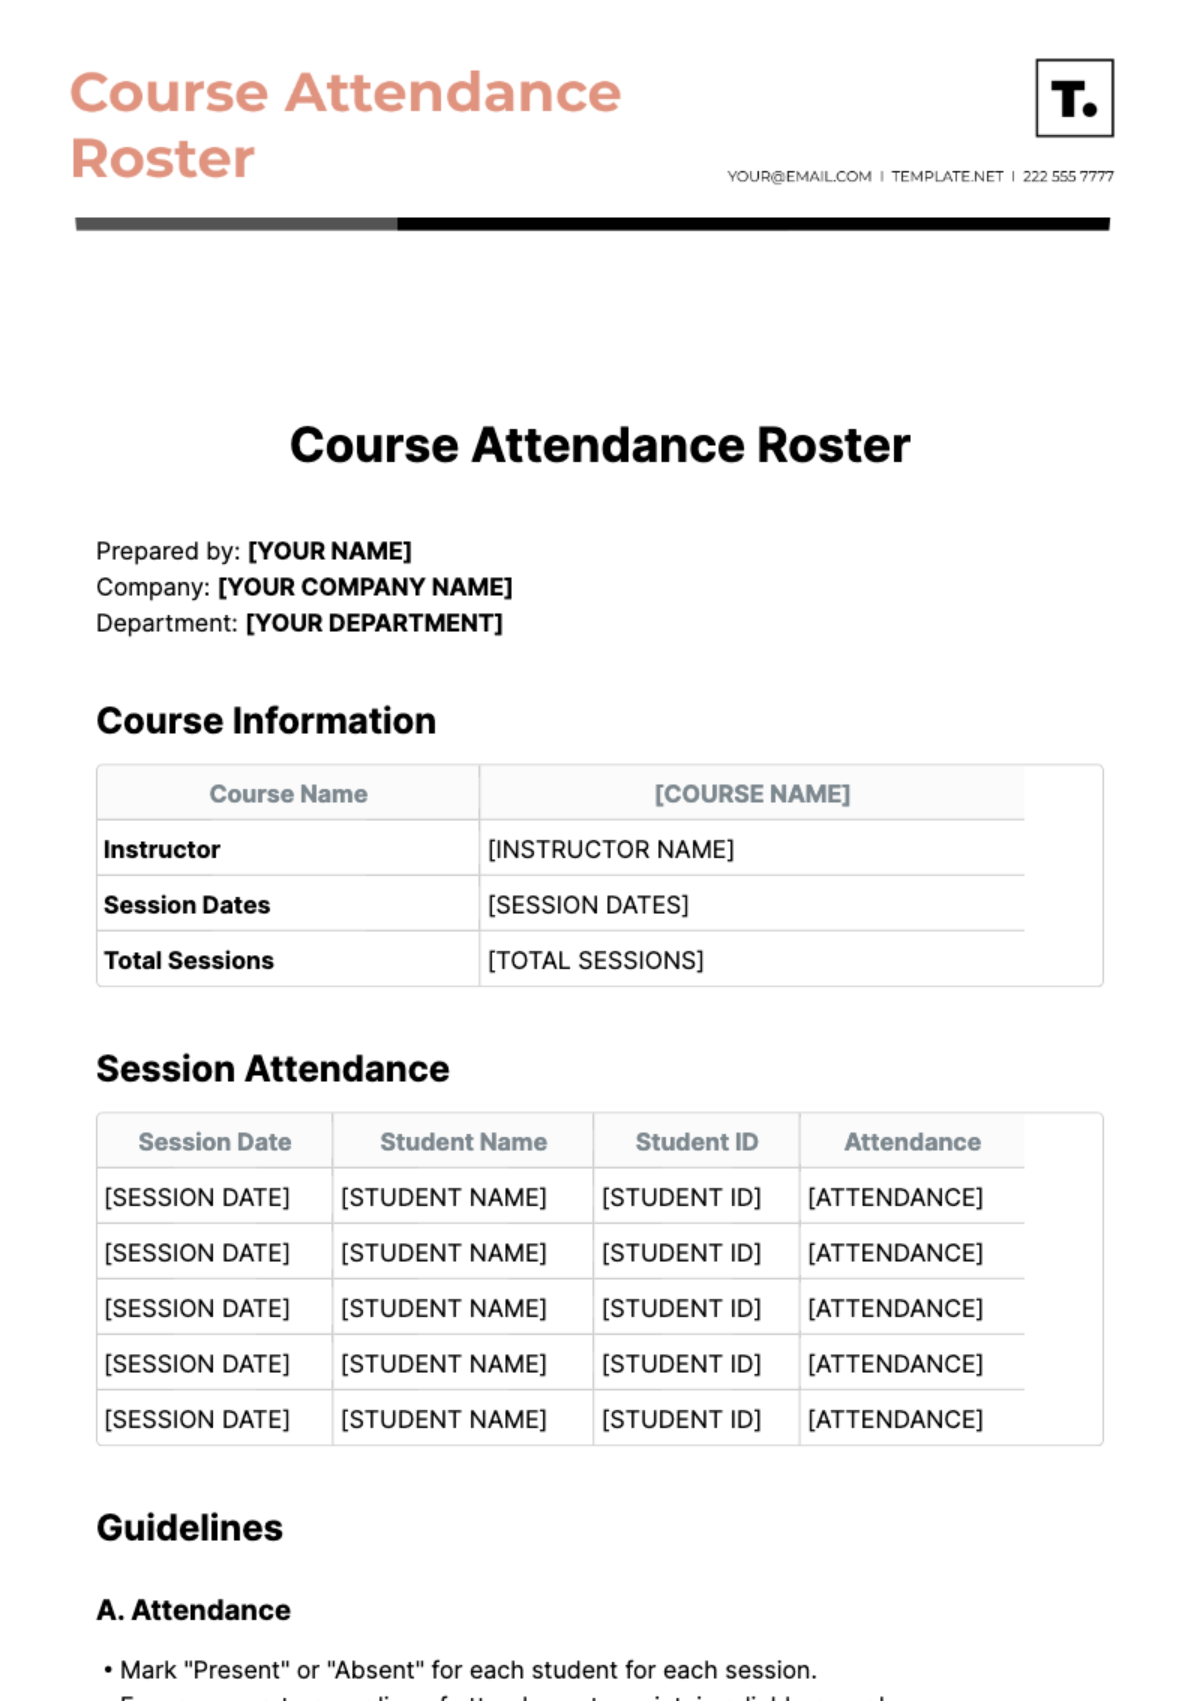 Course Attendance Roster Template